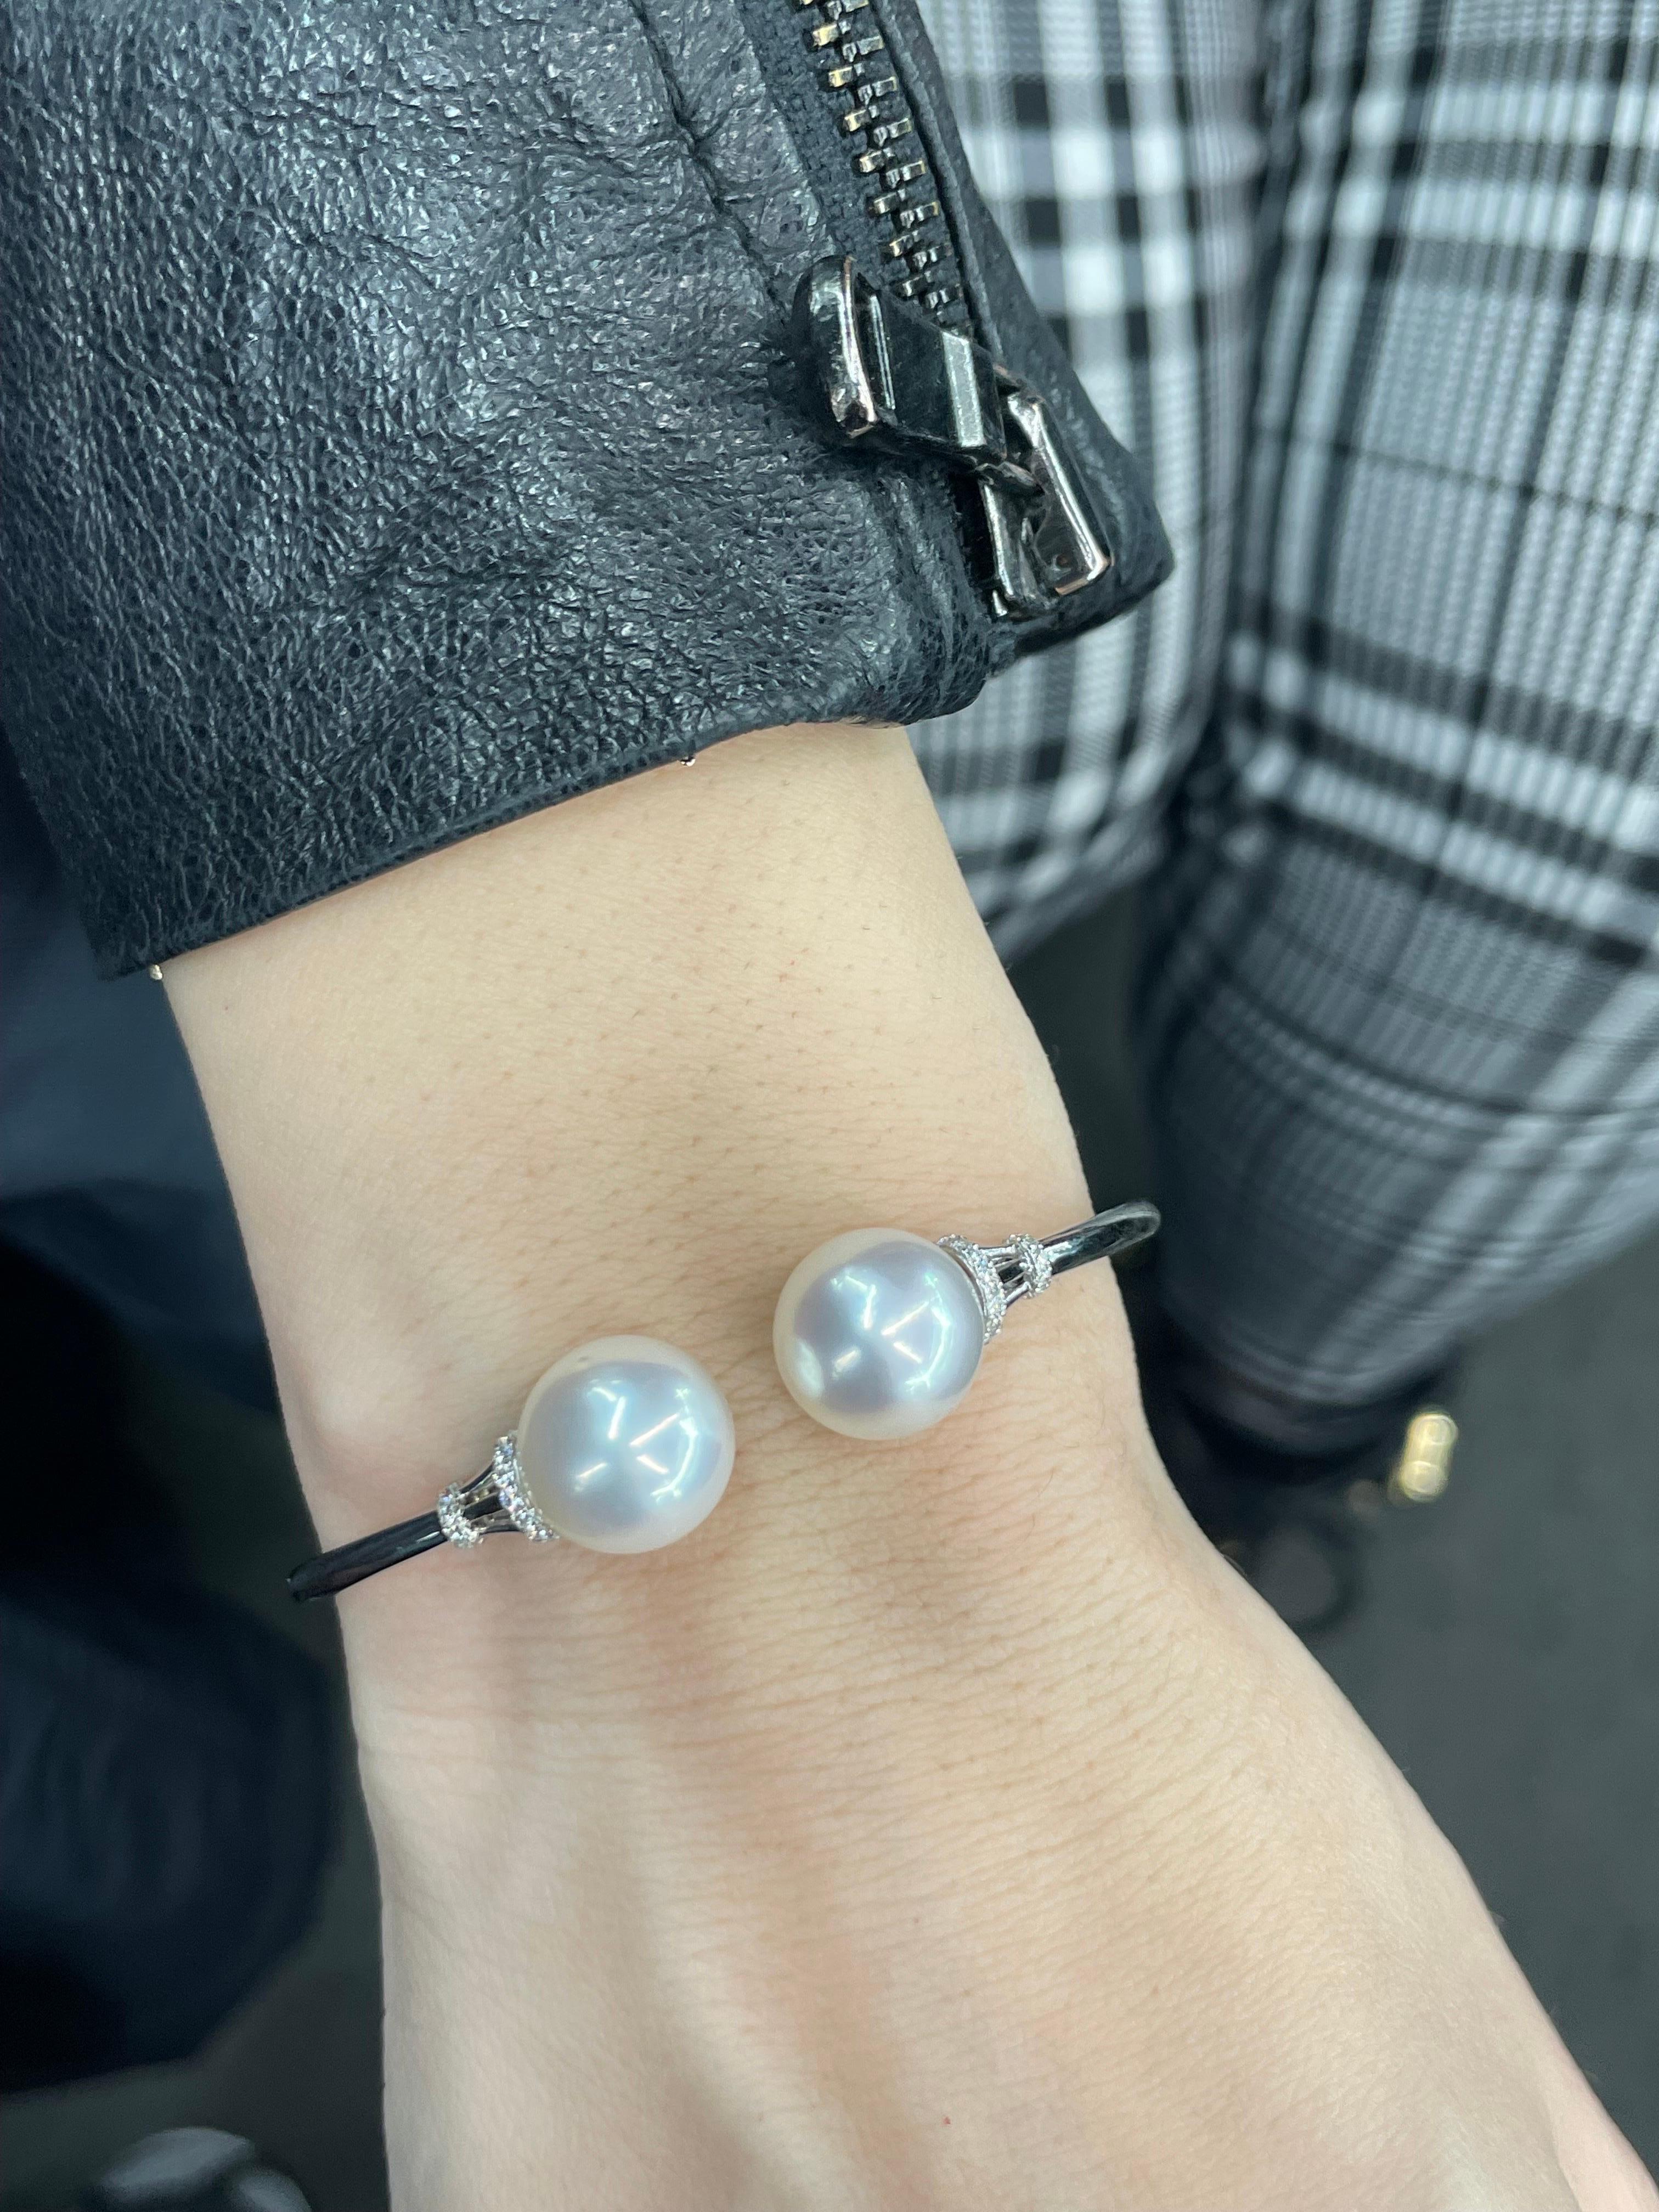 14 Karat White gold bangle bracelet featuring two South Sea Pearls measuring 11-12 mm with diamond touches weighing 0.19 carats.
Pearls can be changed to Tahitian, Pink, or Golden.
DM for pricing. 